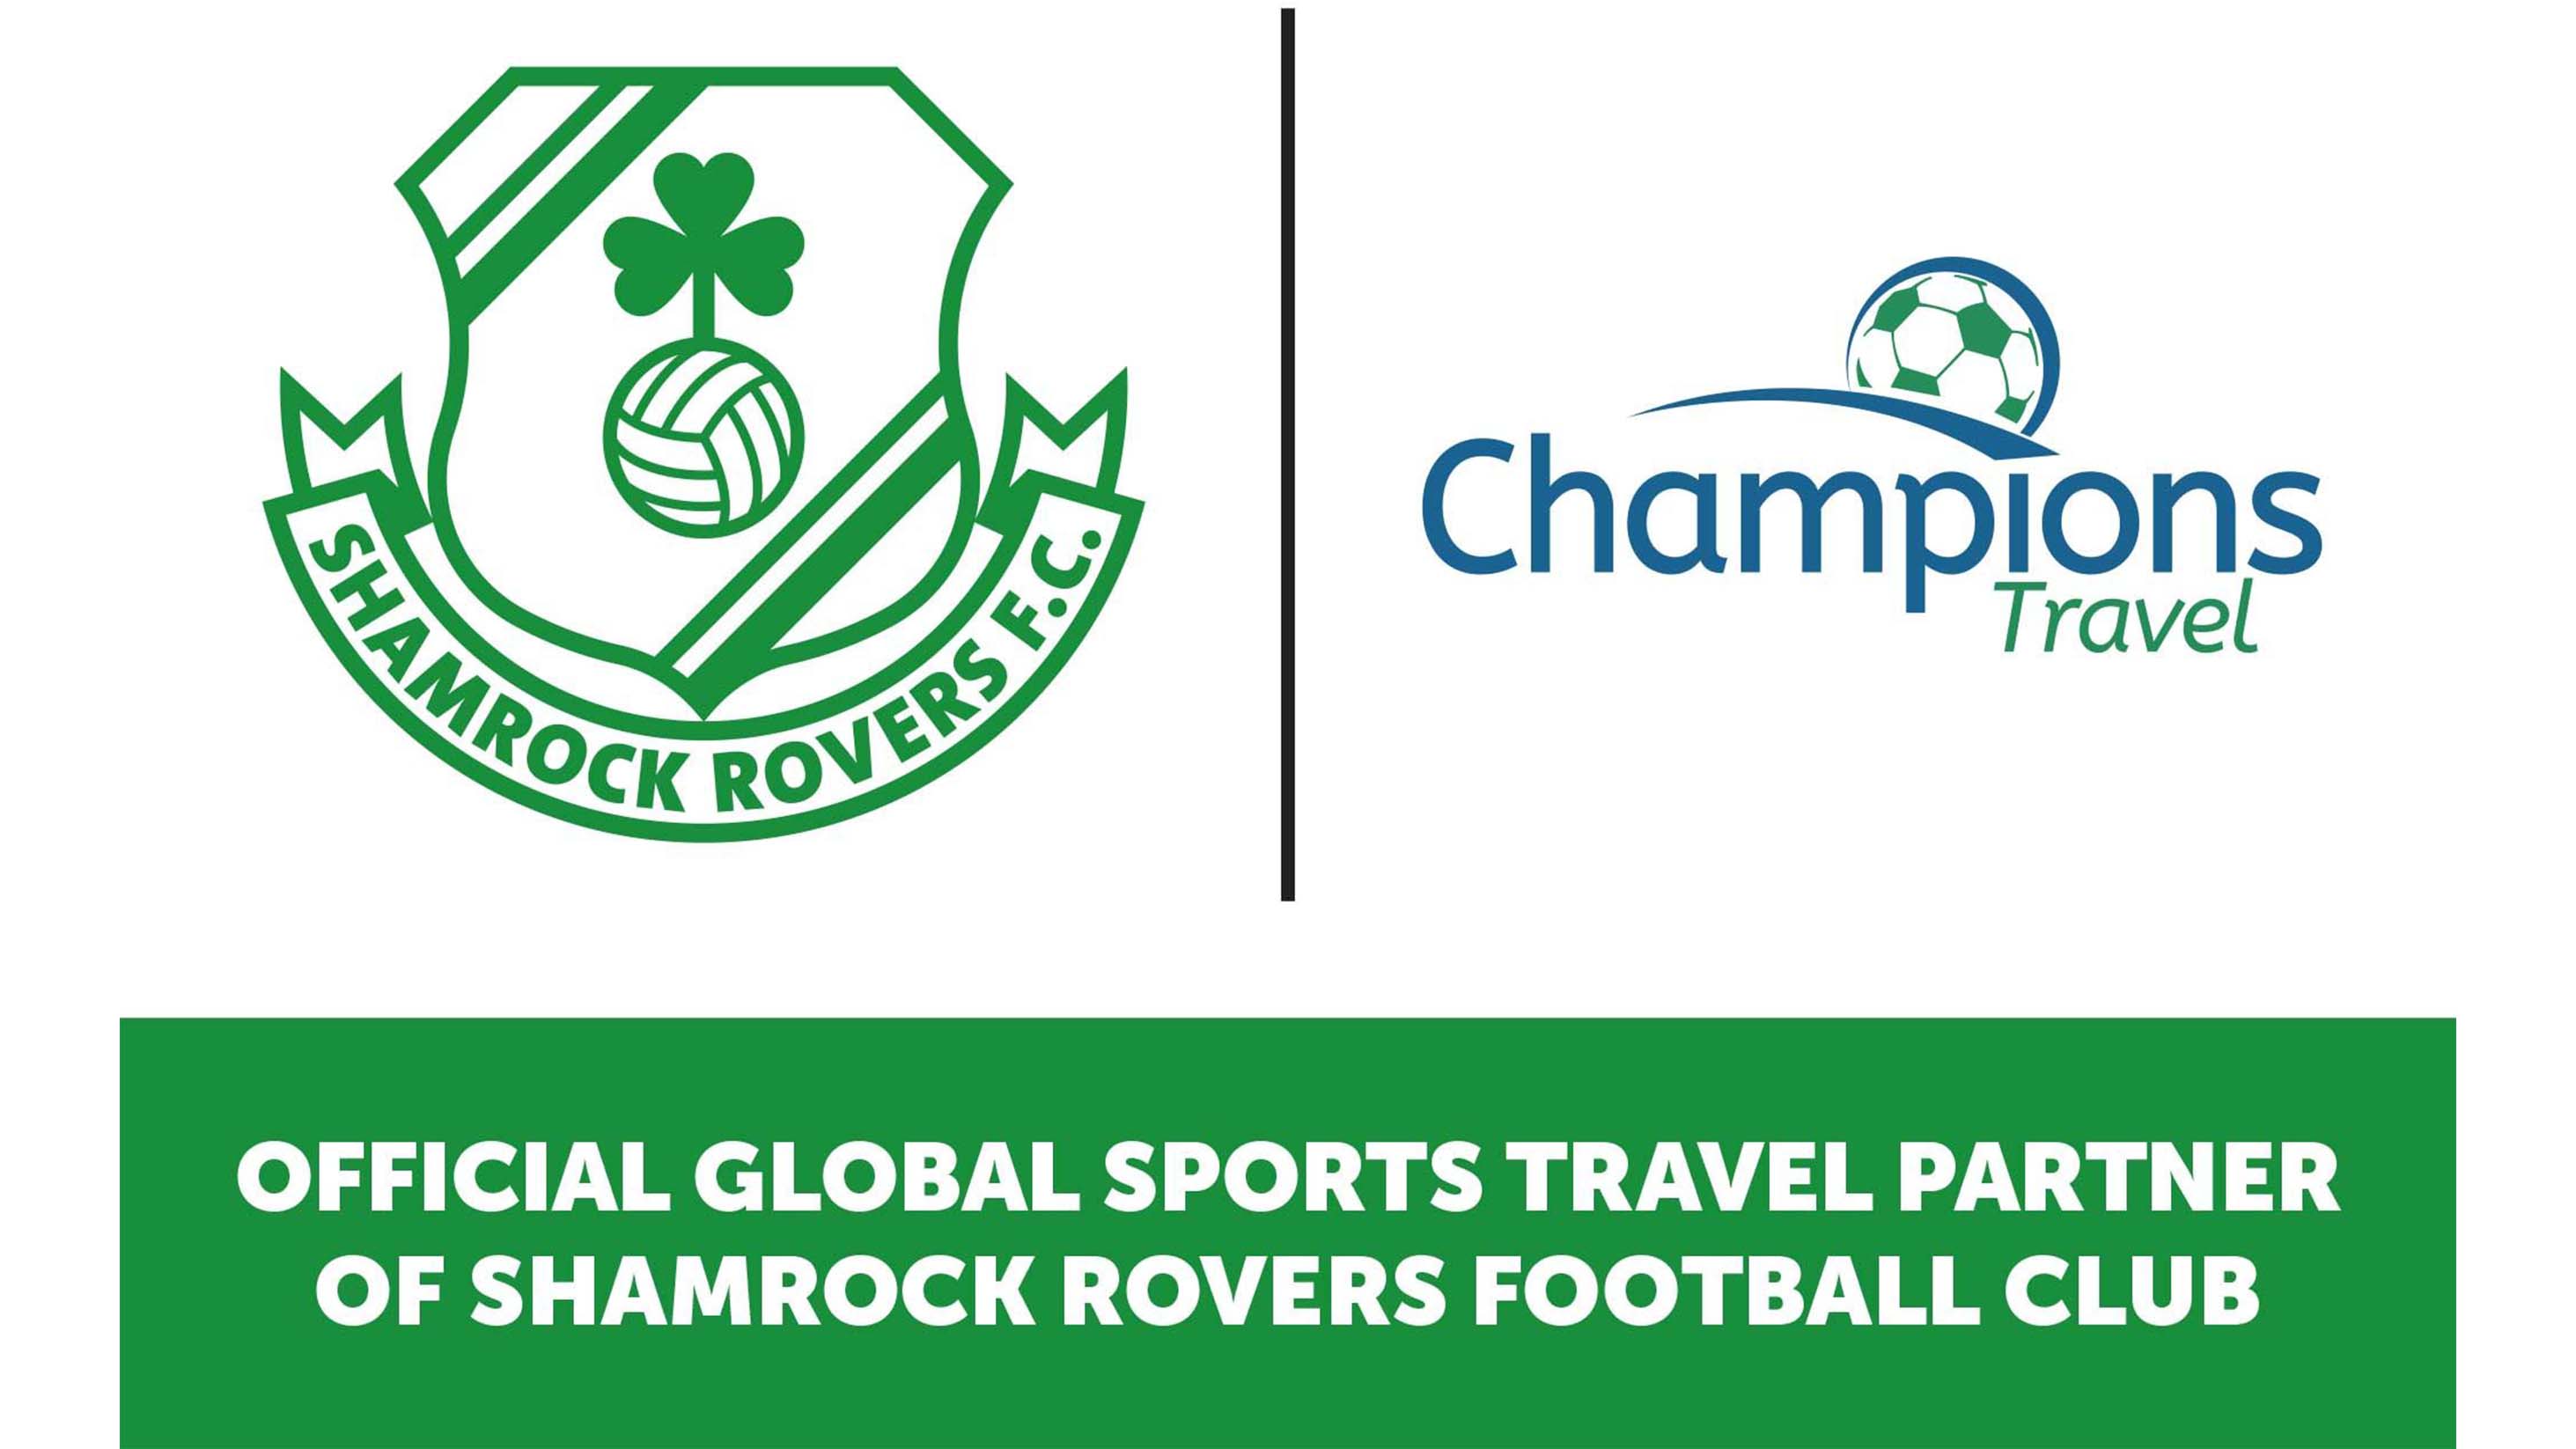 Commercial Partnership with Shamrock Rovers